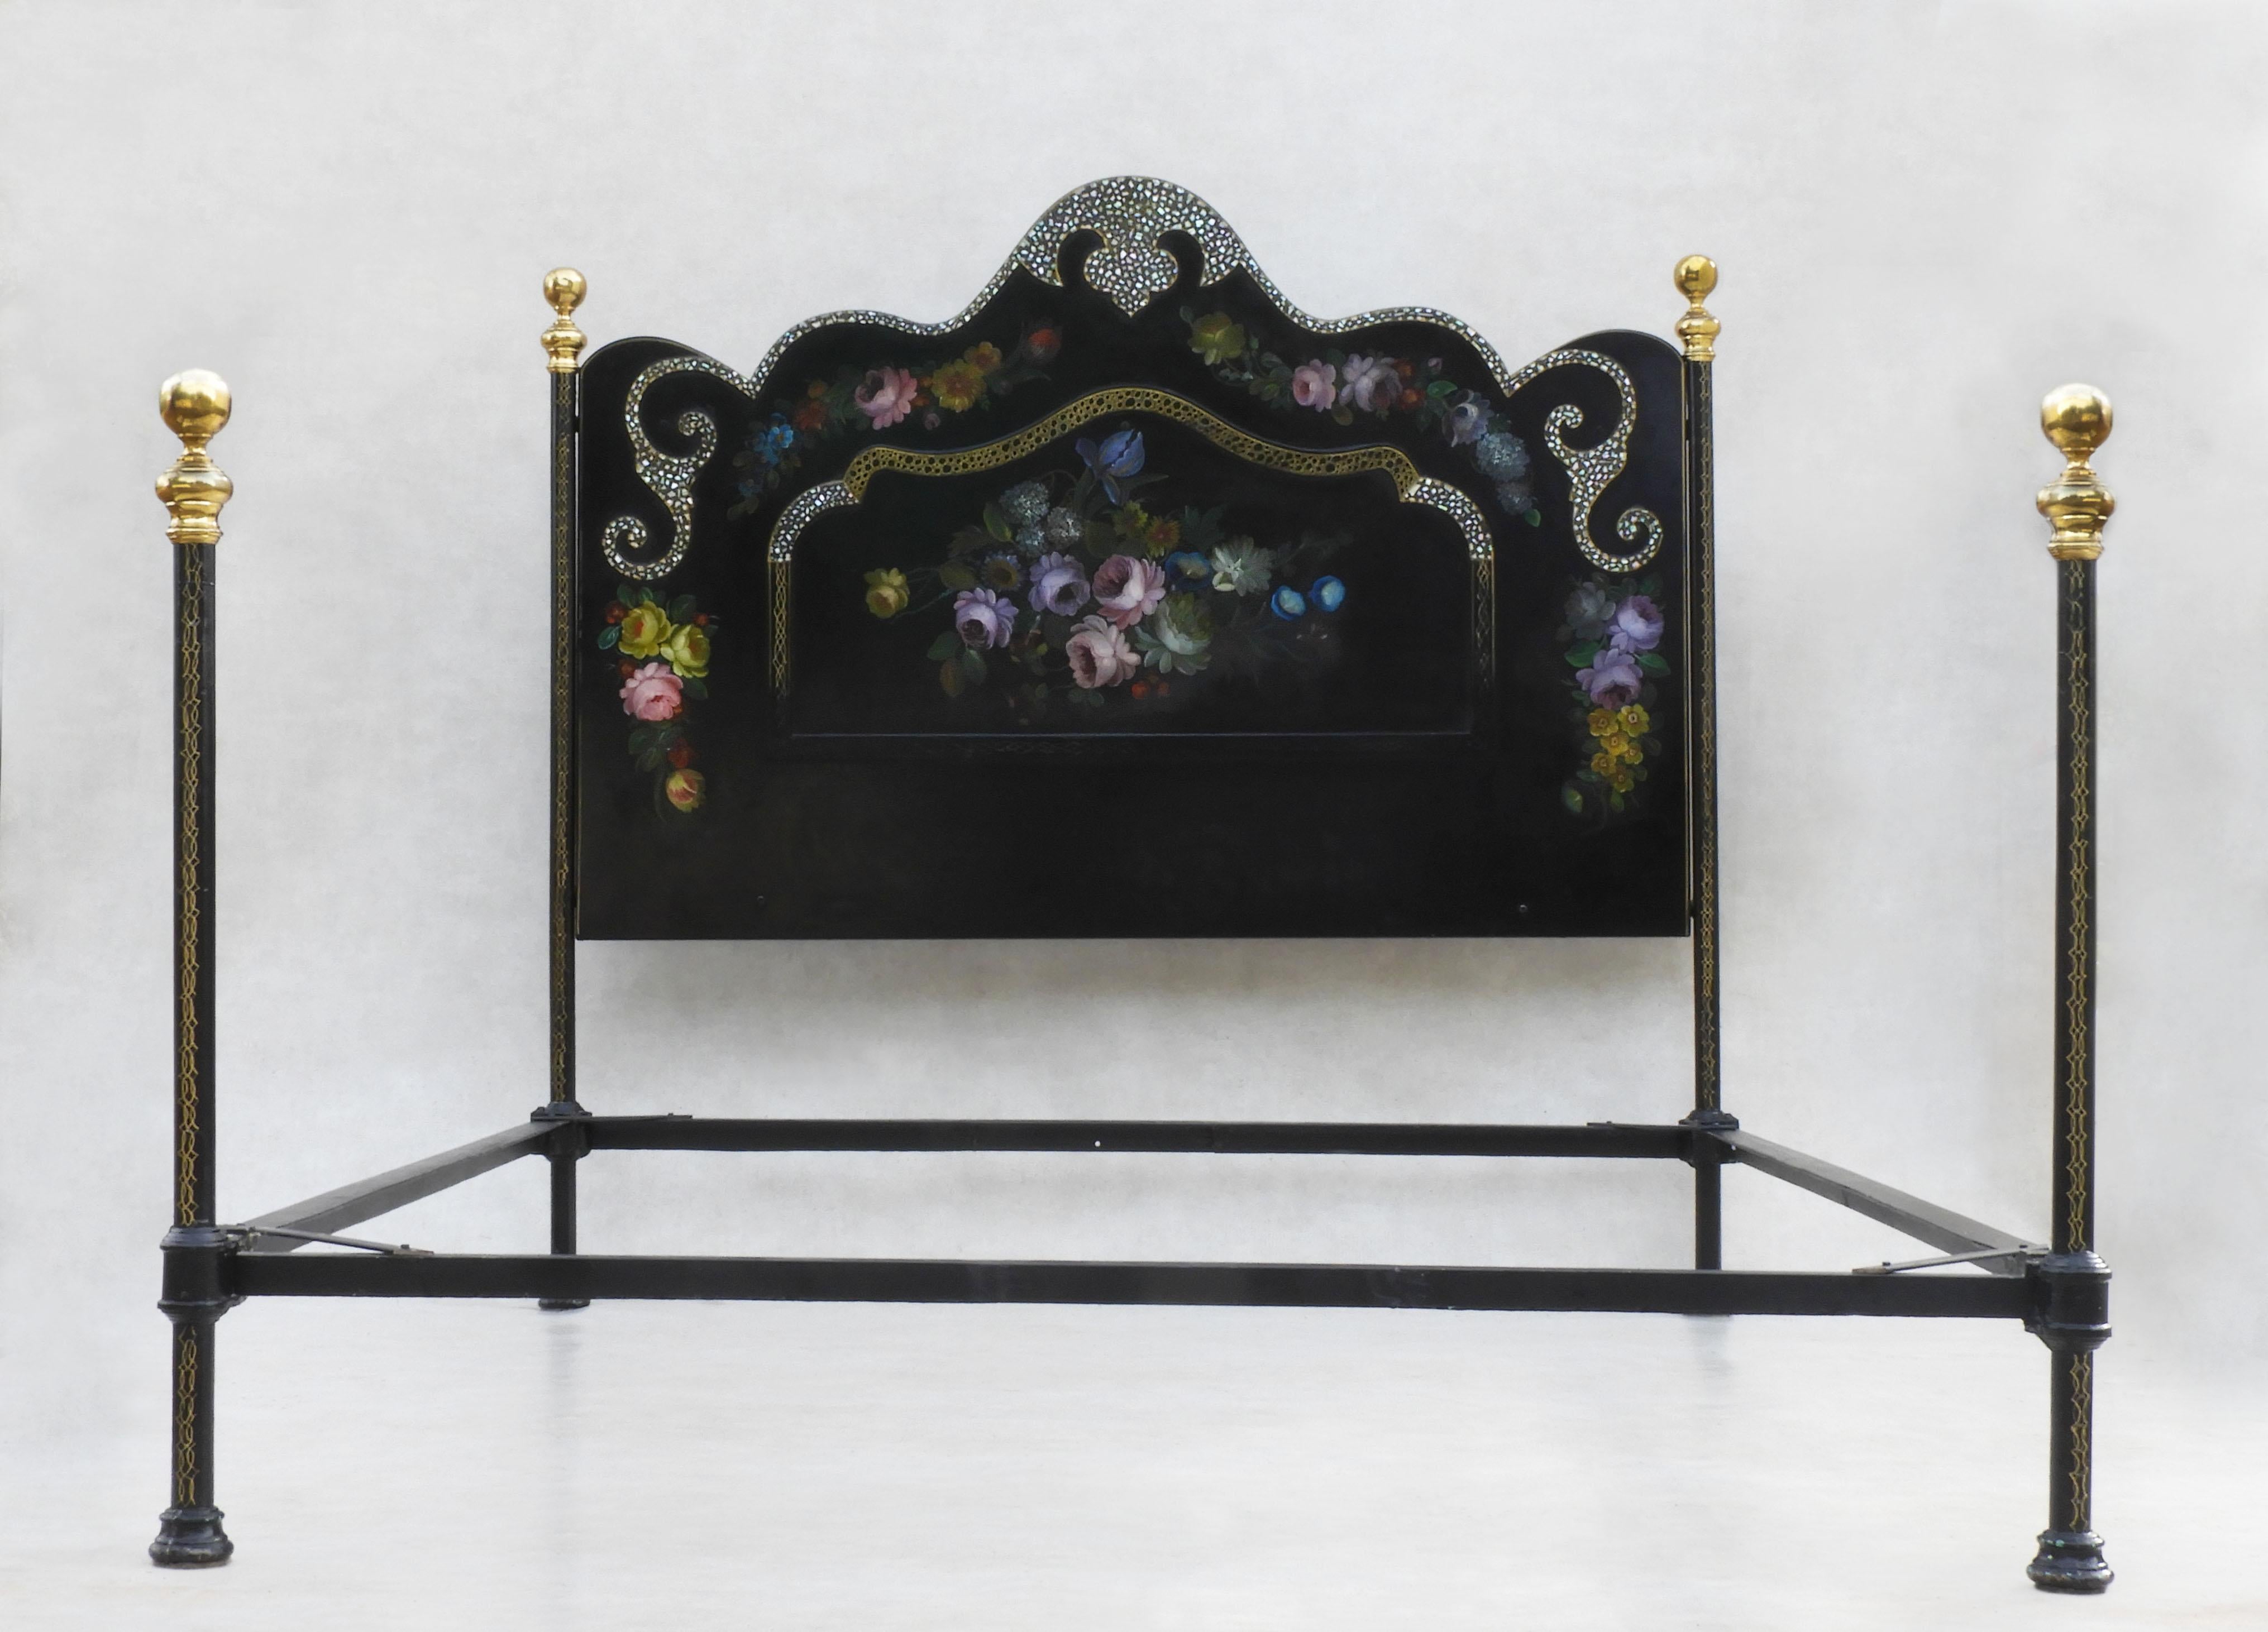 Charming Napoleon III bed with hand-painted florals and inlaid mother of pearl. 
Black Lacquered four-post bed with gilded detailing and brass finials, prettily adorned with beautifully painted flowers and iridescent mother-of-pearl detailing.